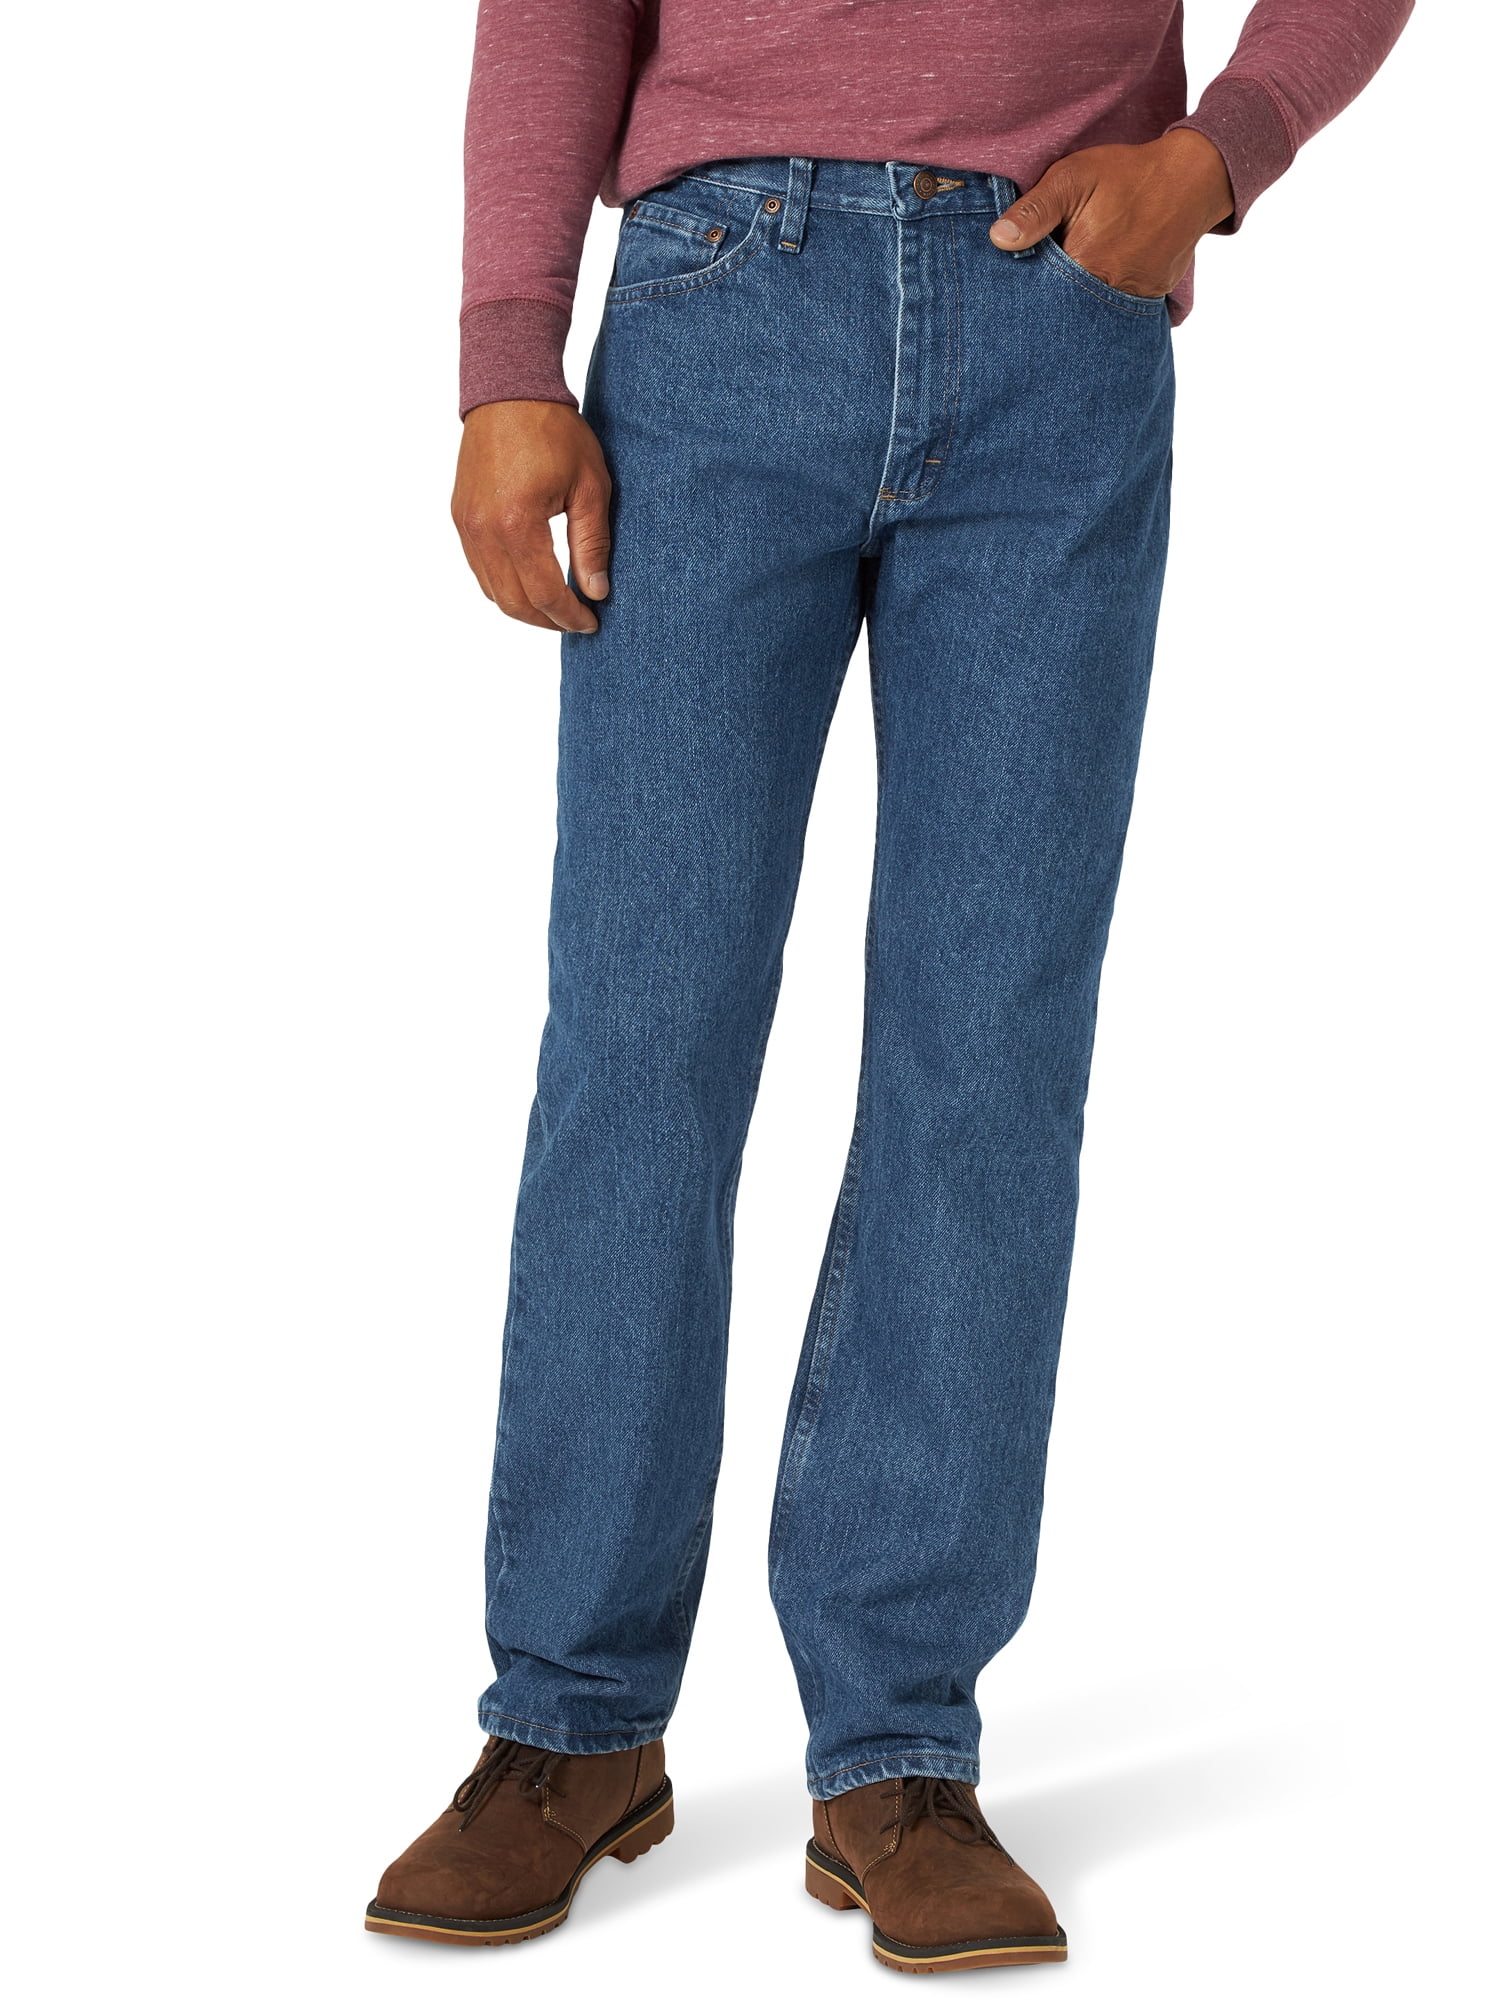 Gap jeans 1969, particularly the 1969 line, have gained popularity and recognition for their quality, style, and versatility